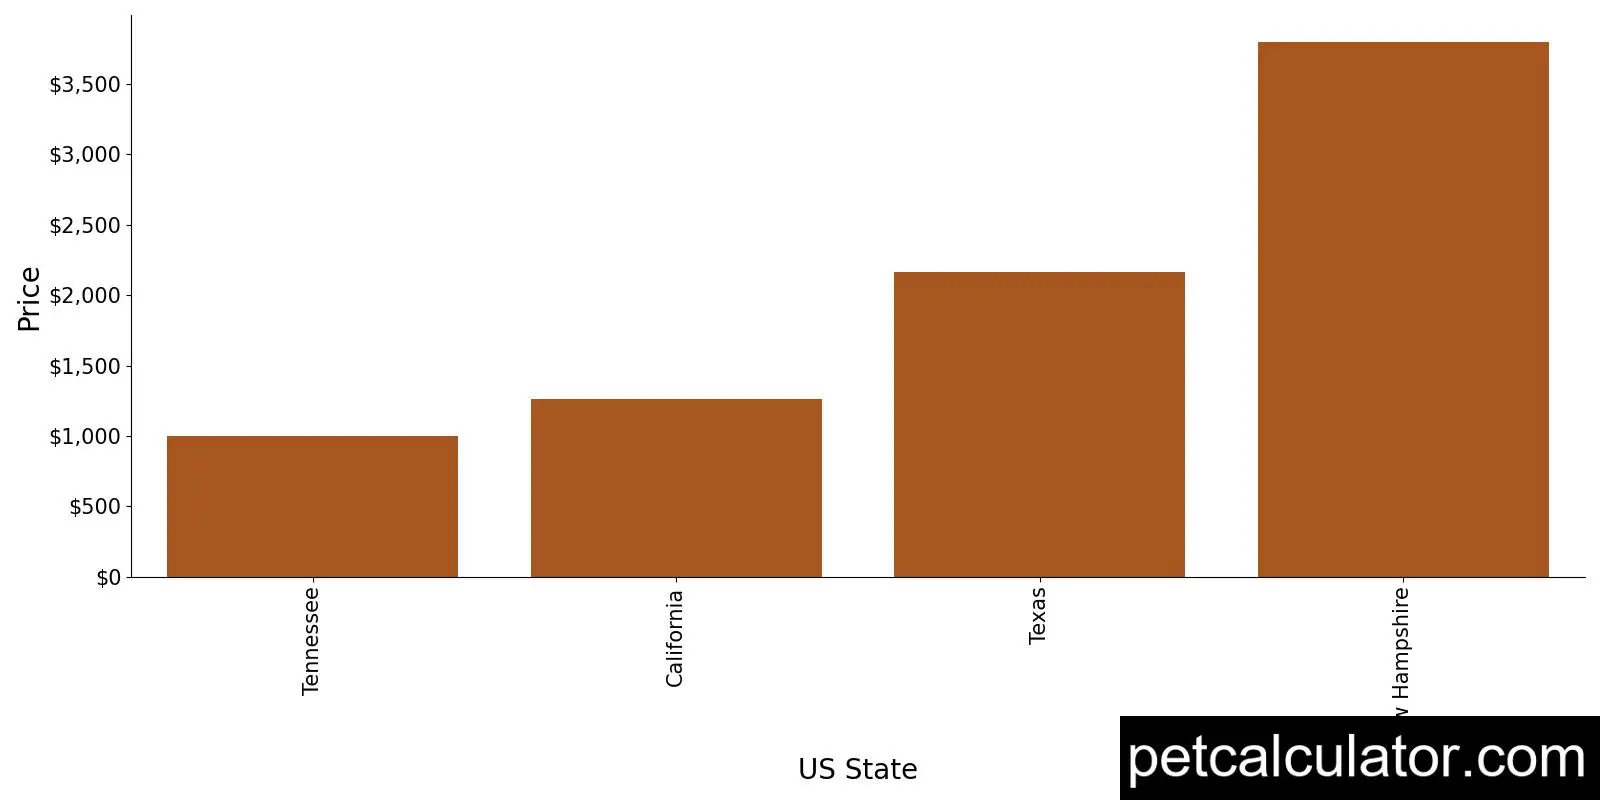 Price of Tibetan Spaniel by US State 